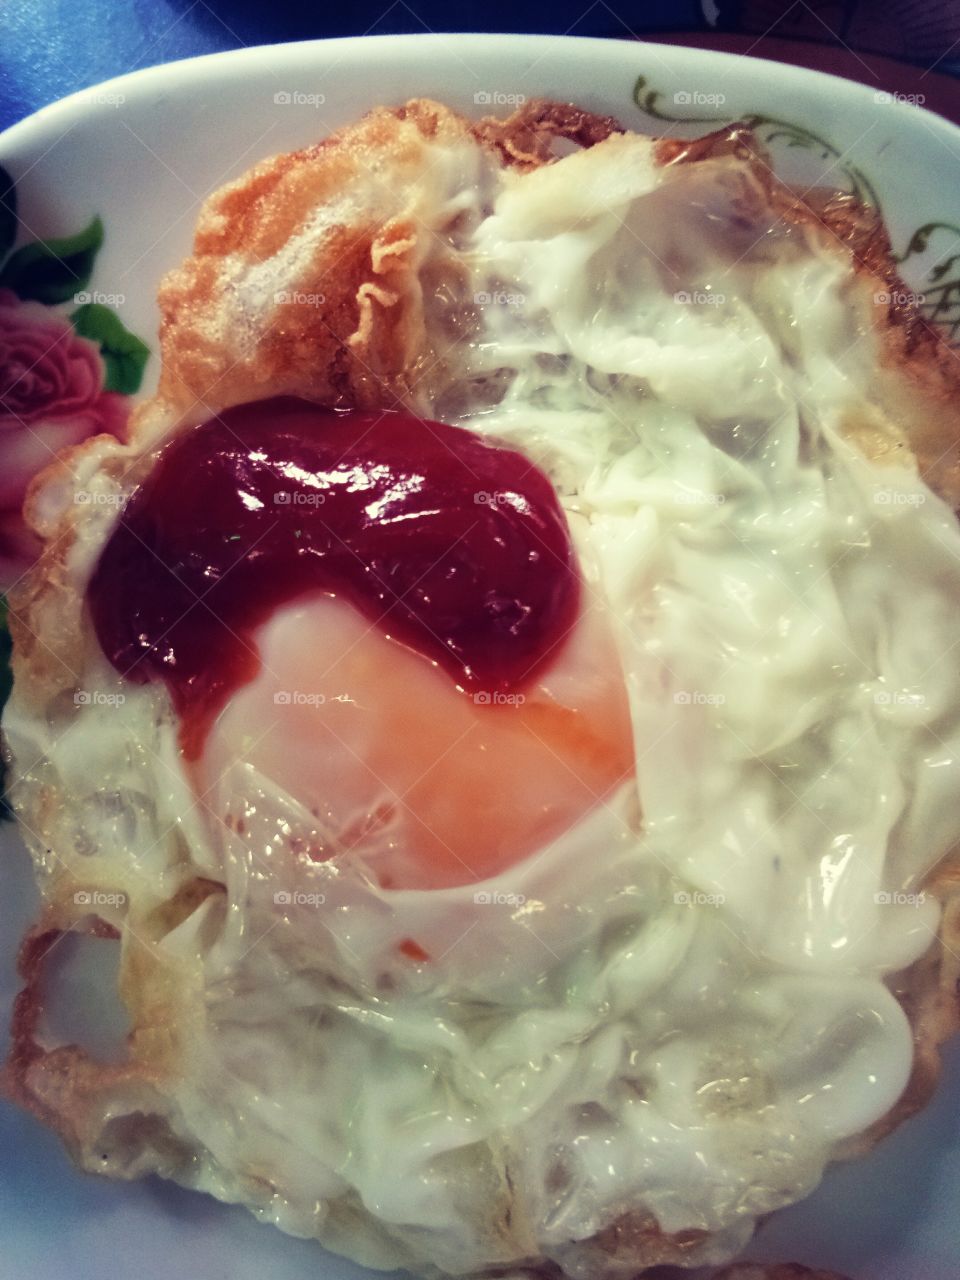 fried egg with ketchup
food
good
health